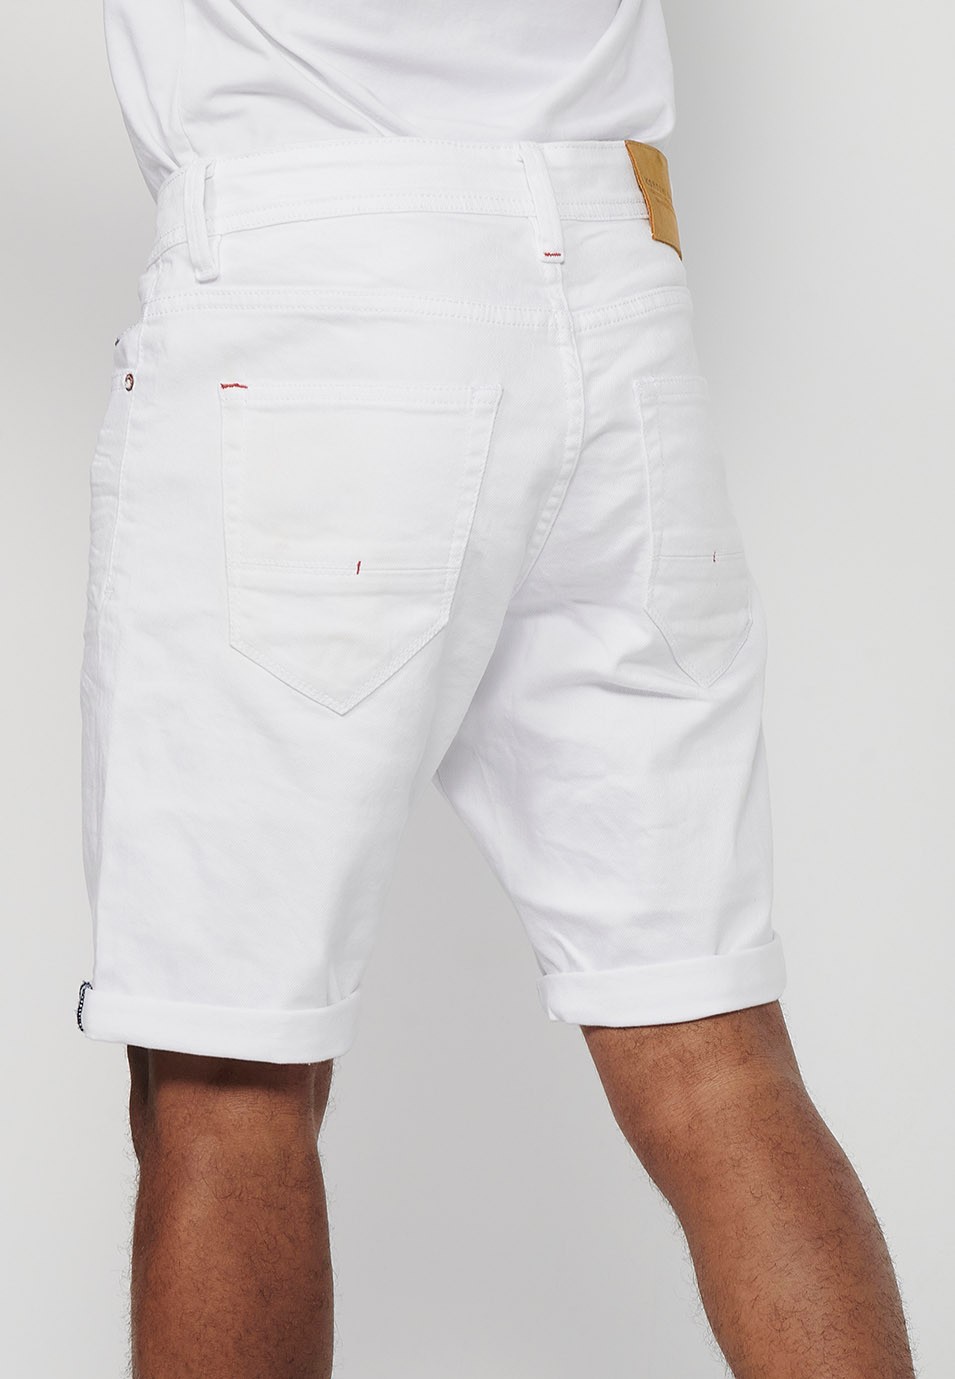 Denim Bermuda shorts with turn-up finish and front closure with zipper and button in White for Men 8